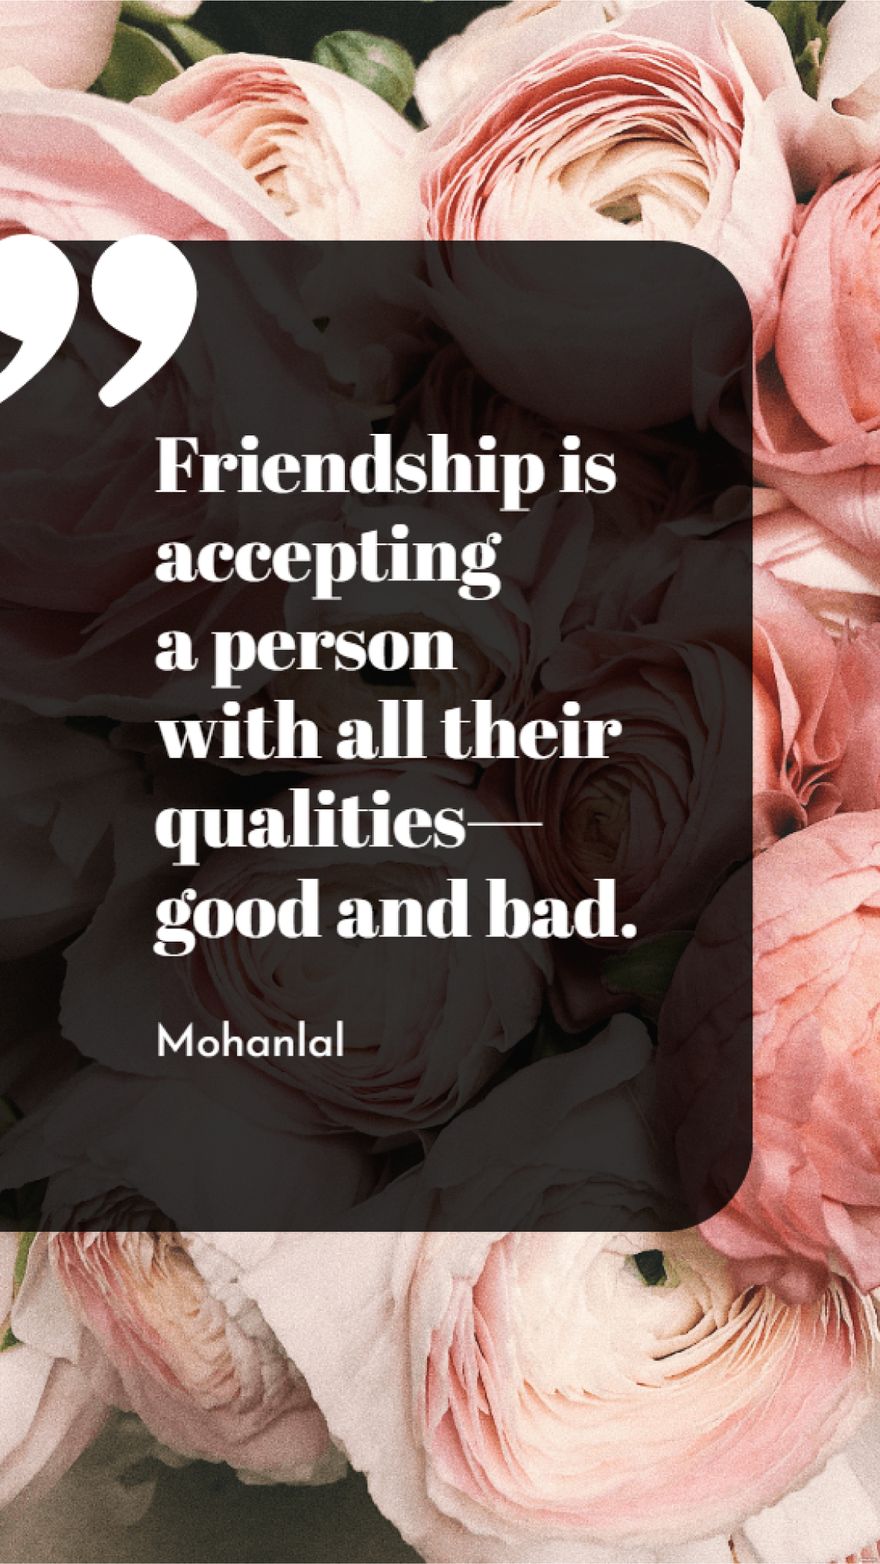 Mohanlal  Friendship is accepting a person with all their qualities  good and bad